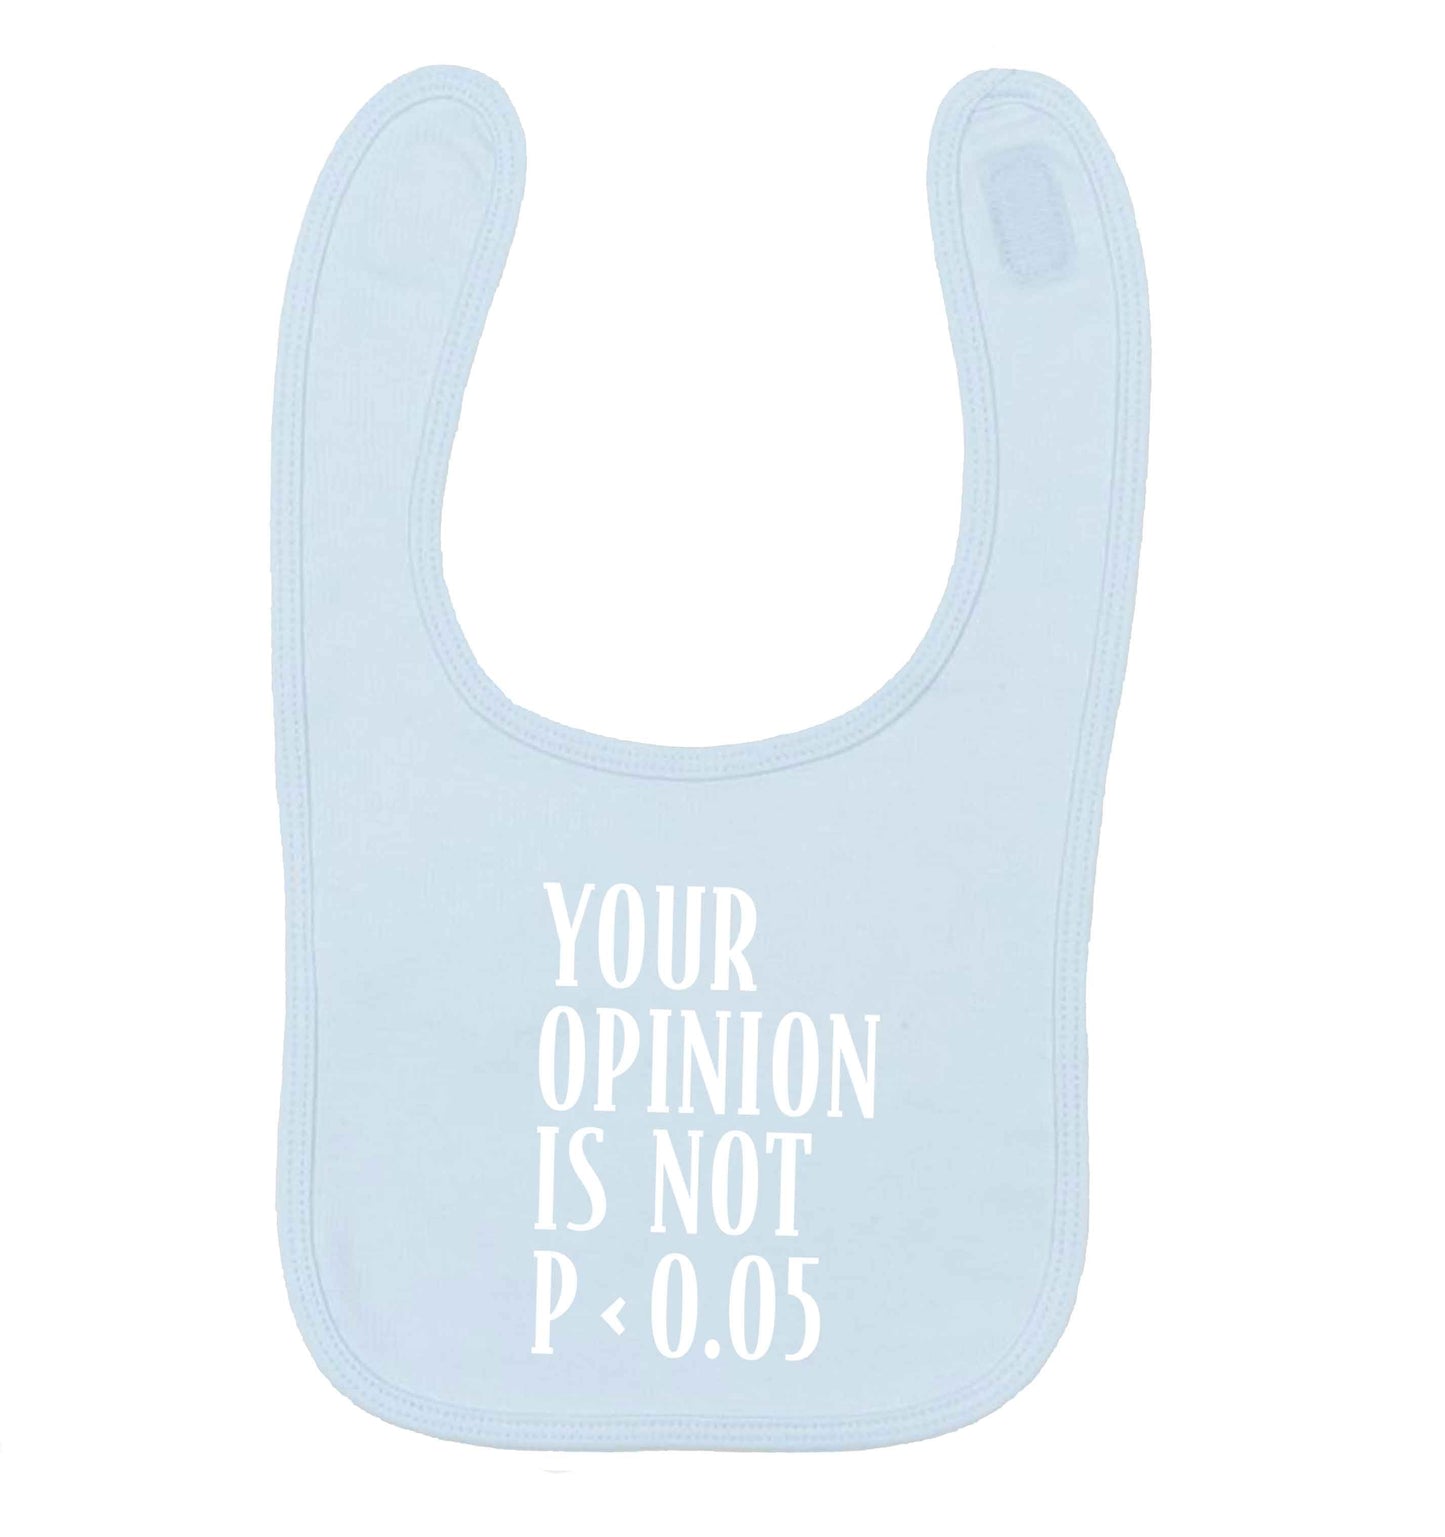 Your opinion is not P < 0.05pale blue baby bib